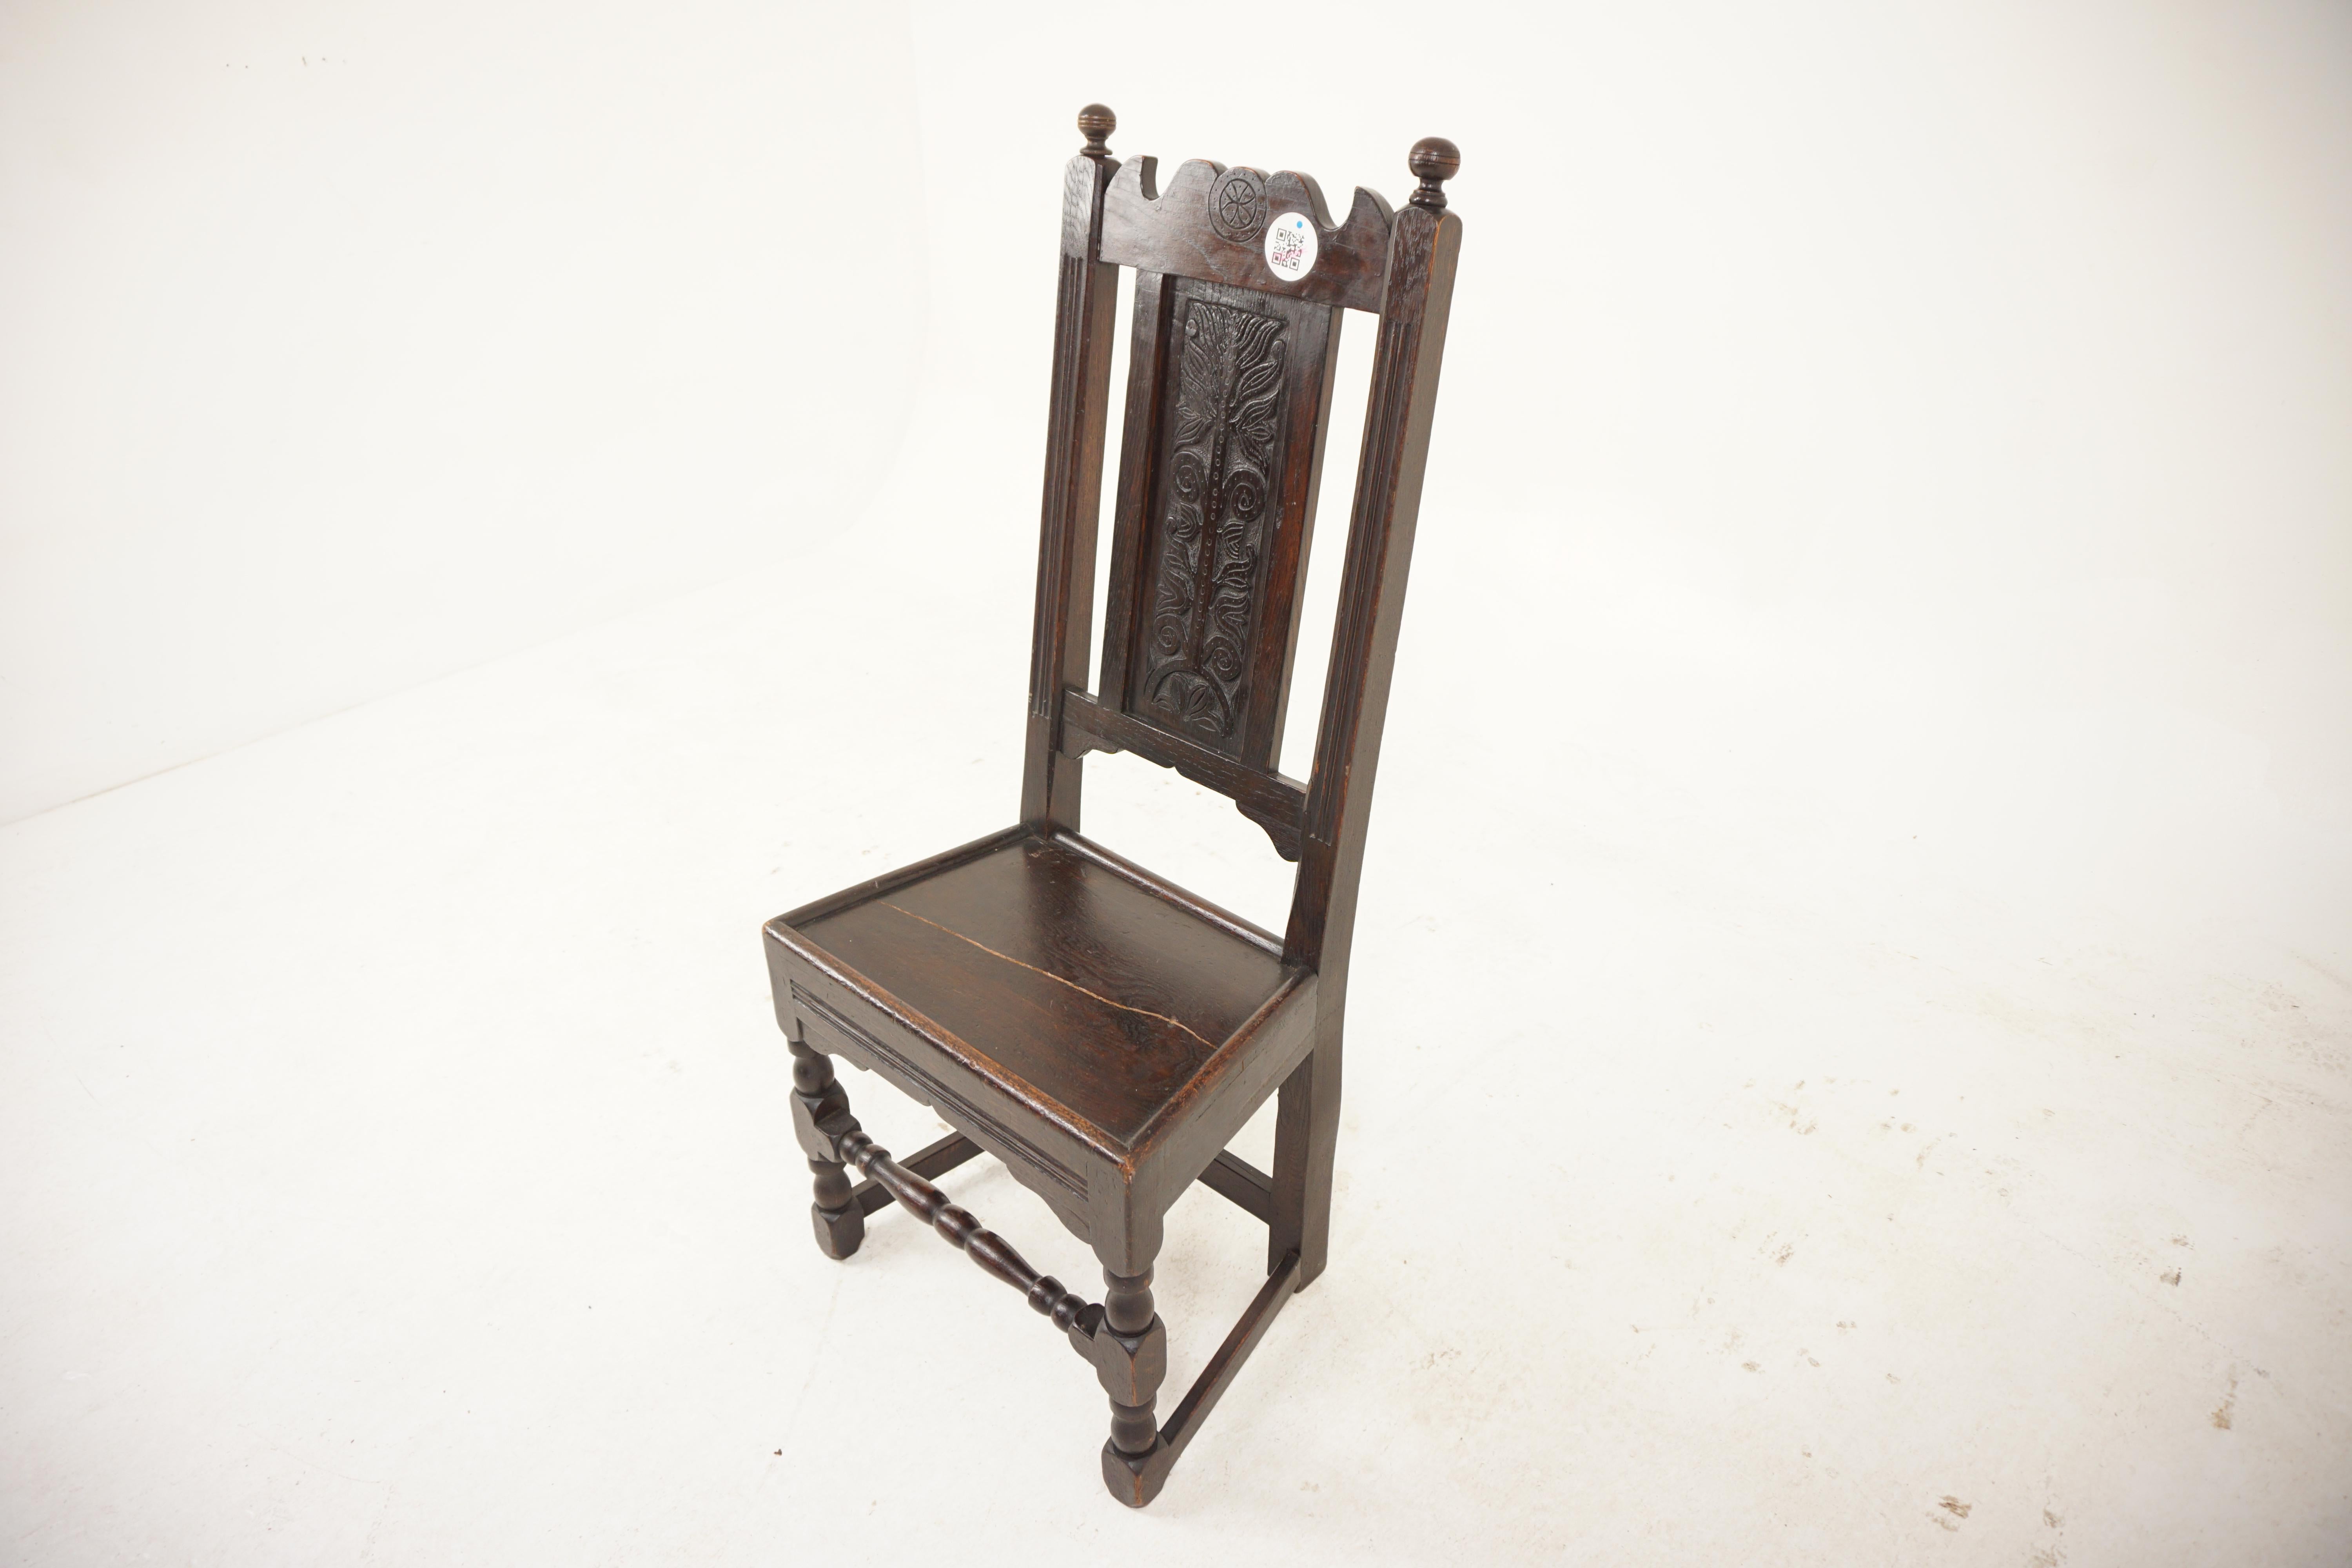 Georgian carved oak hall chair, Scotland 1820, H579

Scotland 1820
Solid oak
Original finish
Carved top rail with reeded side supports
Turned finials on top
Carved panelled back with floral design
Solid wooden seat with split on